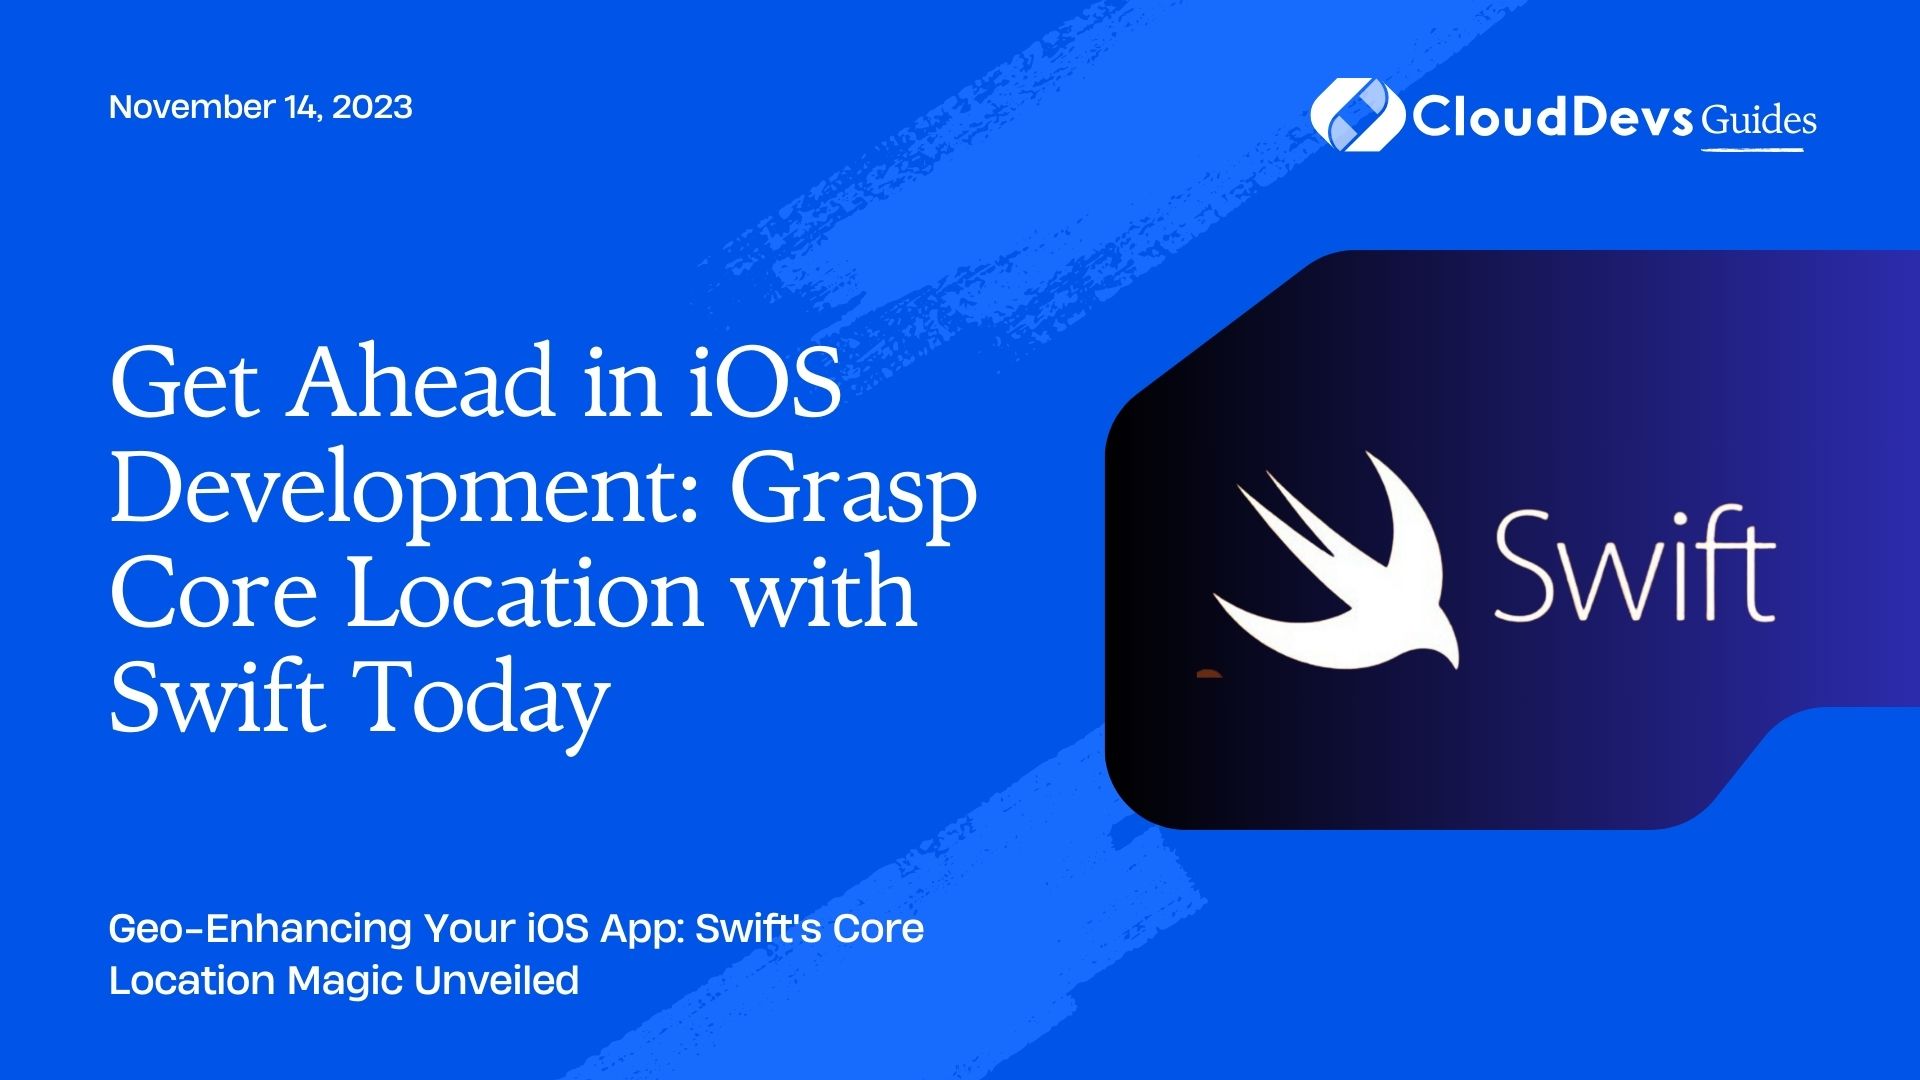 Get Ahead in iOS Development: Grasp Core Location with Swift Today